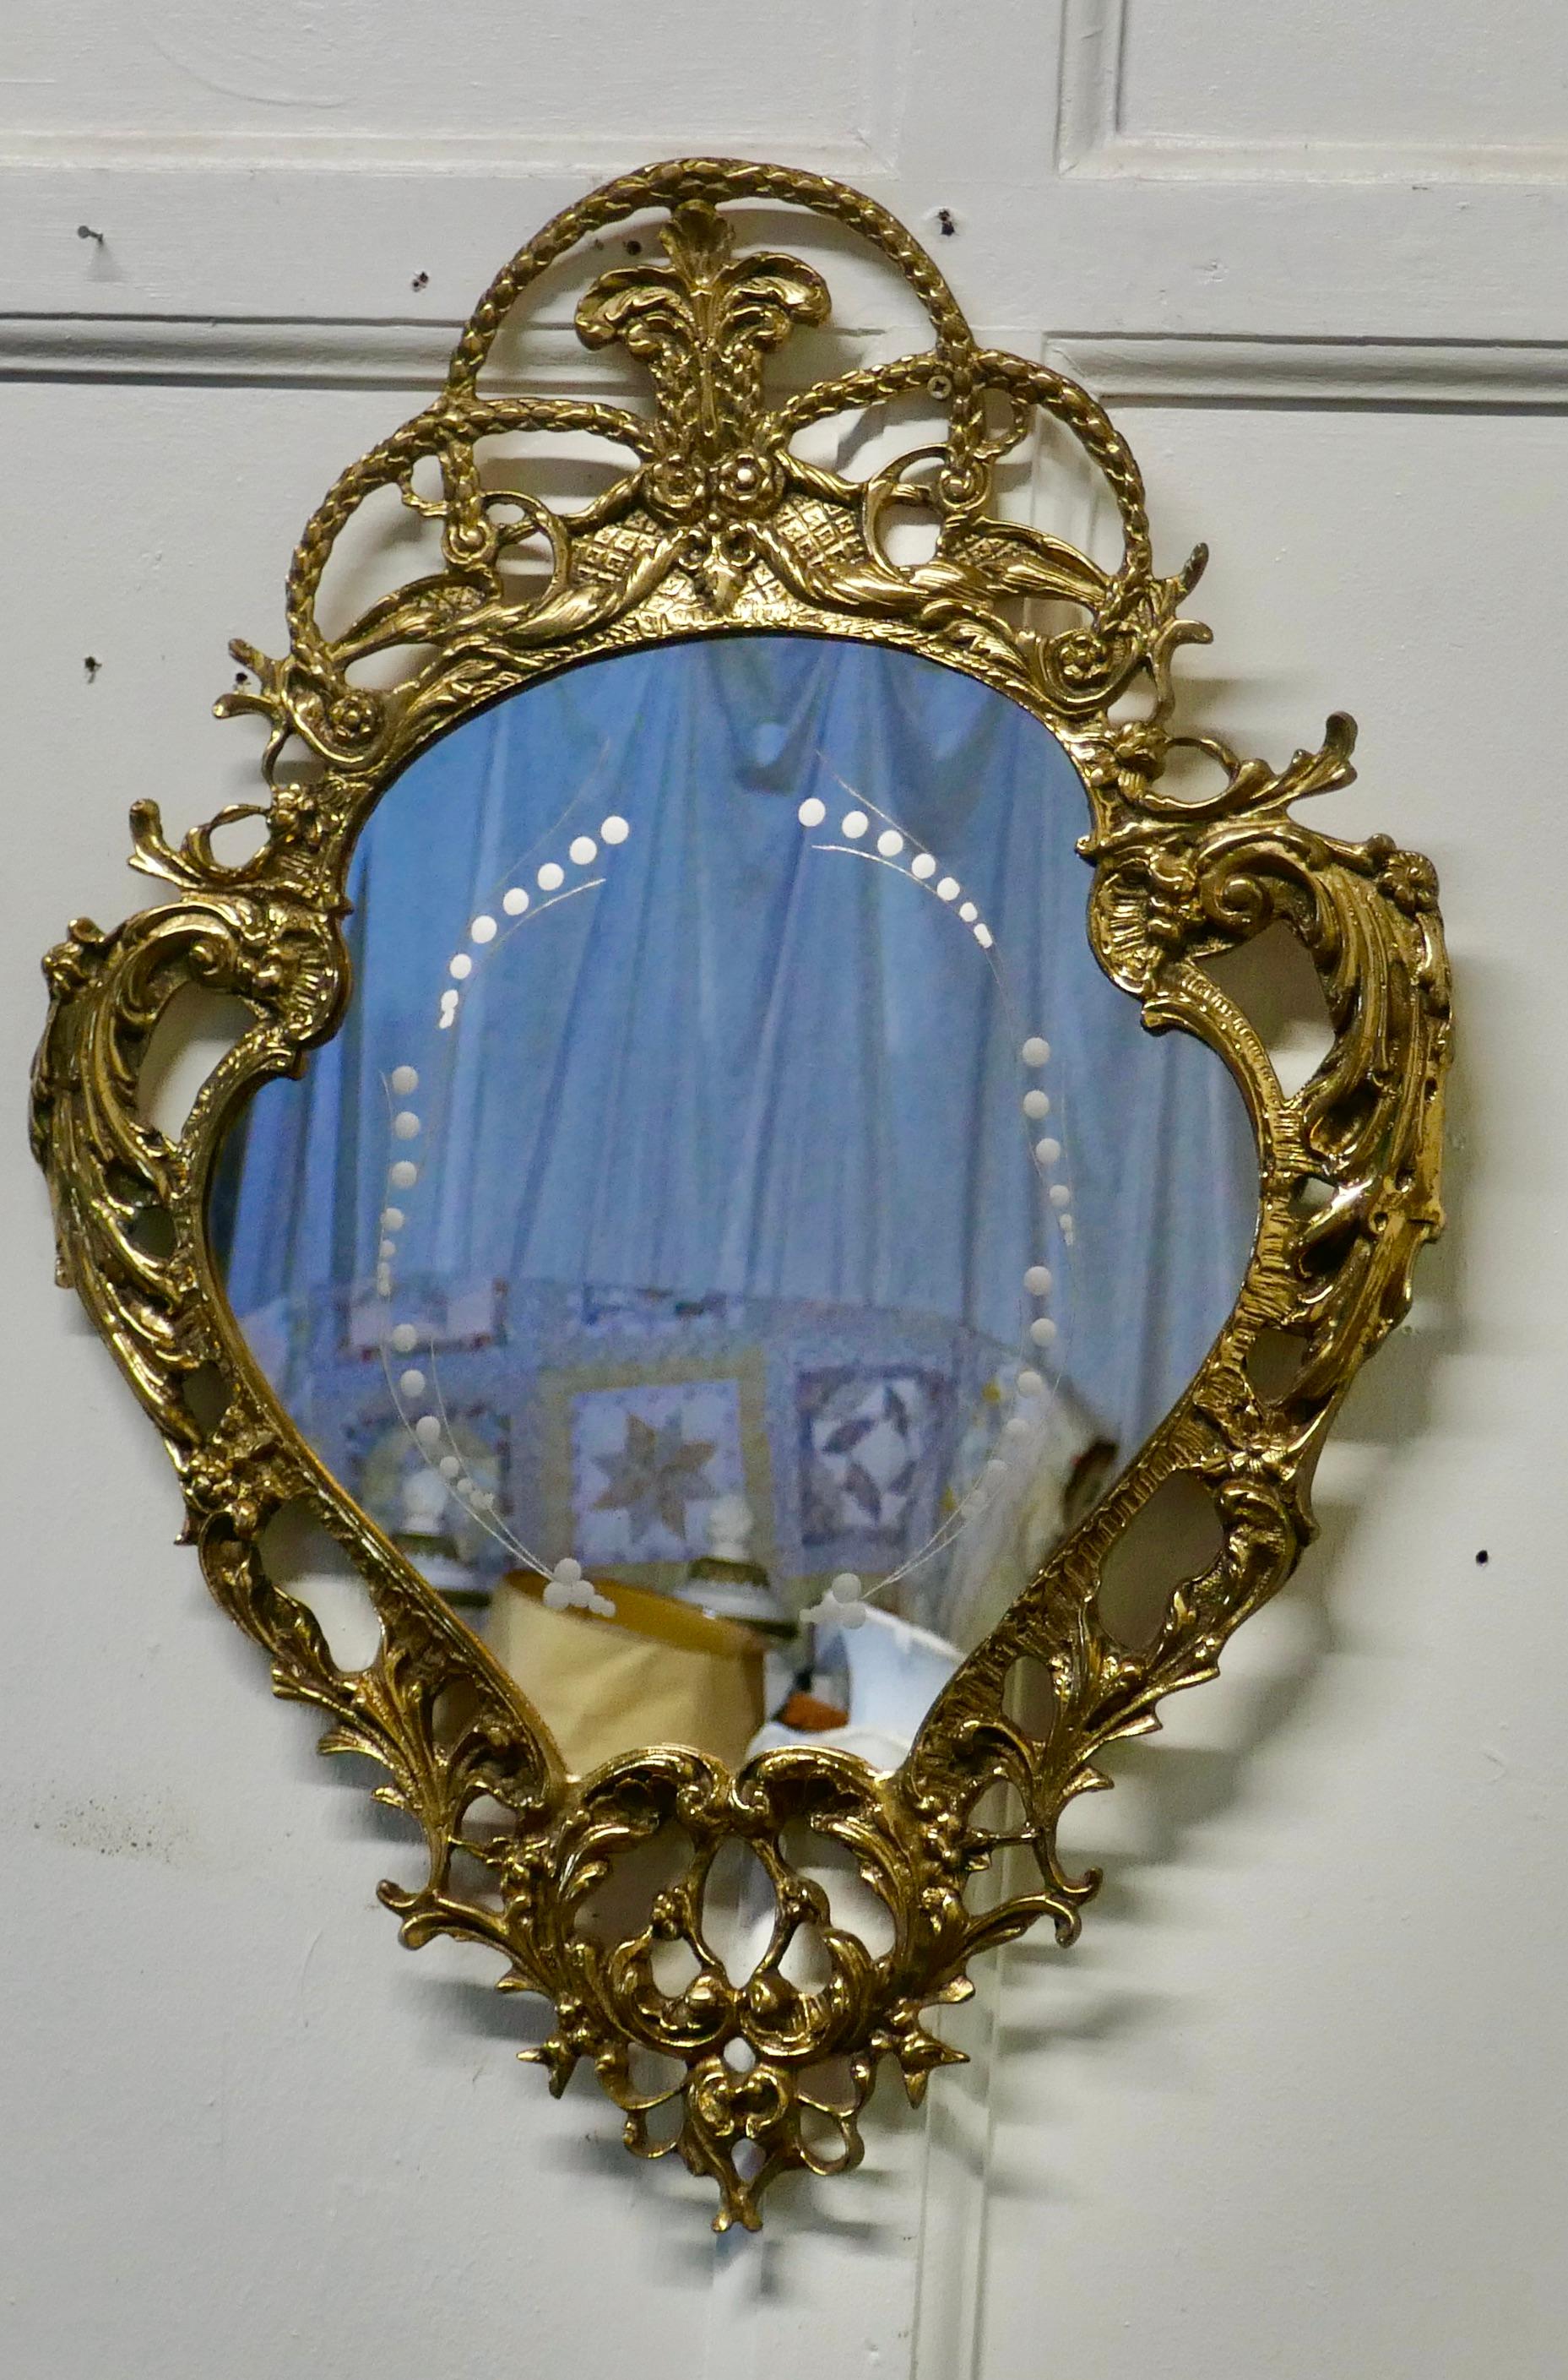 Unusual brass filigree mirror with etched glass pattern

A very attractive piece with an unusual shape and decorative brass frame
The mirror itself has a dainty beaded etched design
The mirror is in good condition, it is 26” tall and 19”